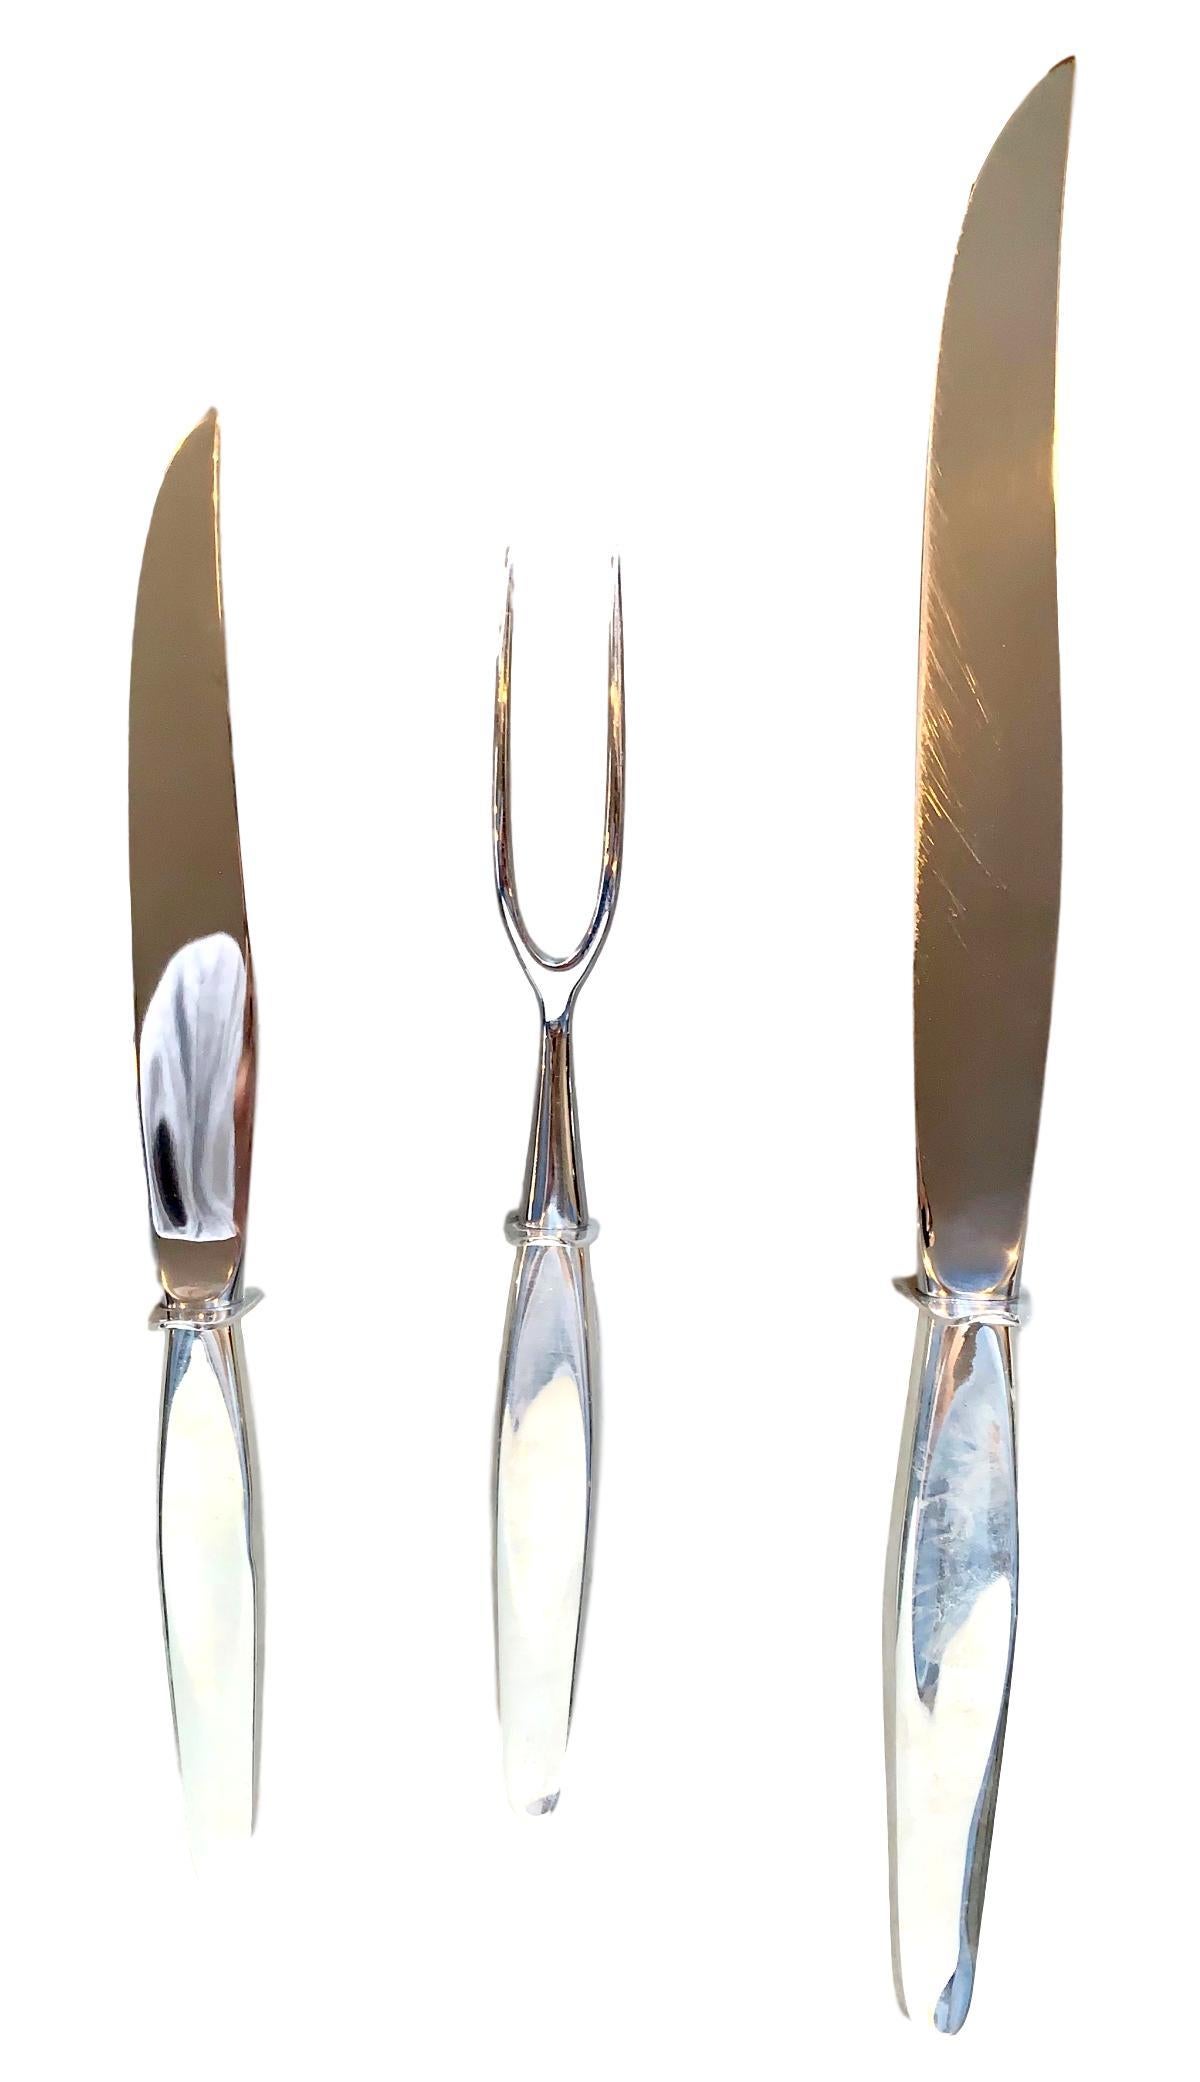 A large 139 piece sterling silver flatware set in the Countour pattern by Towle of Newburyport, MA. Contour was introduced in 1951. Contour has a soft and flowing appearance, it has a play of concave and convex surfaces. The objective of ornament is